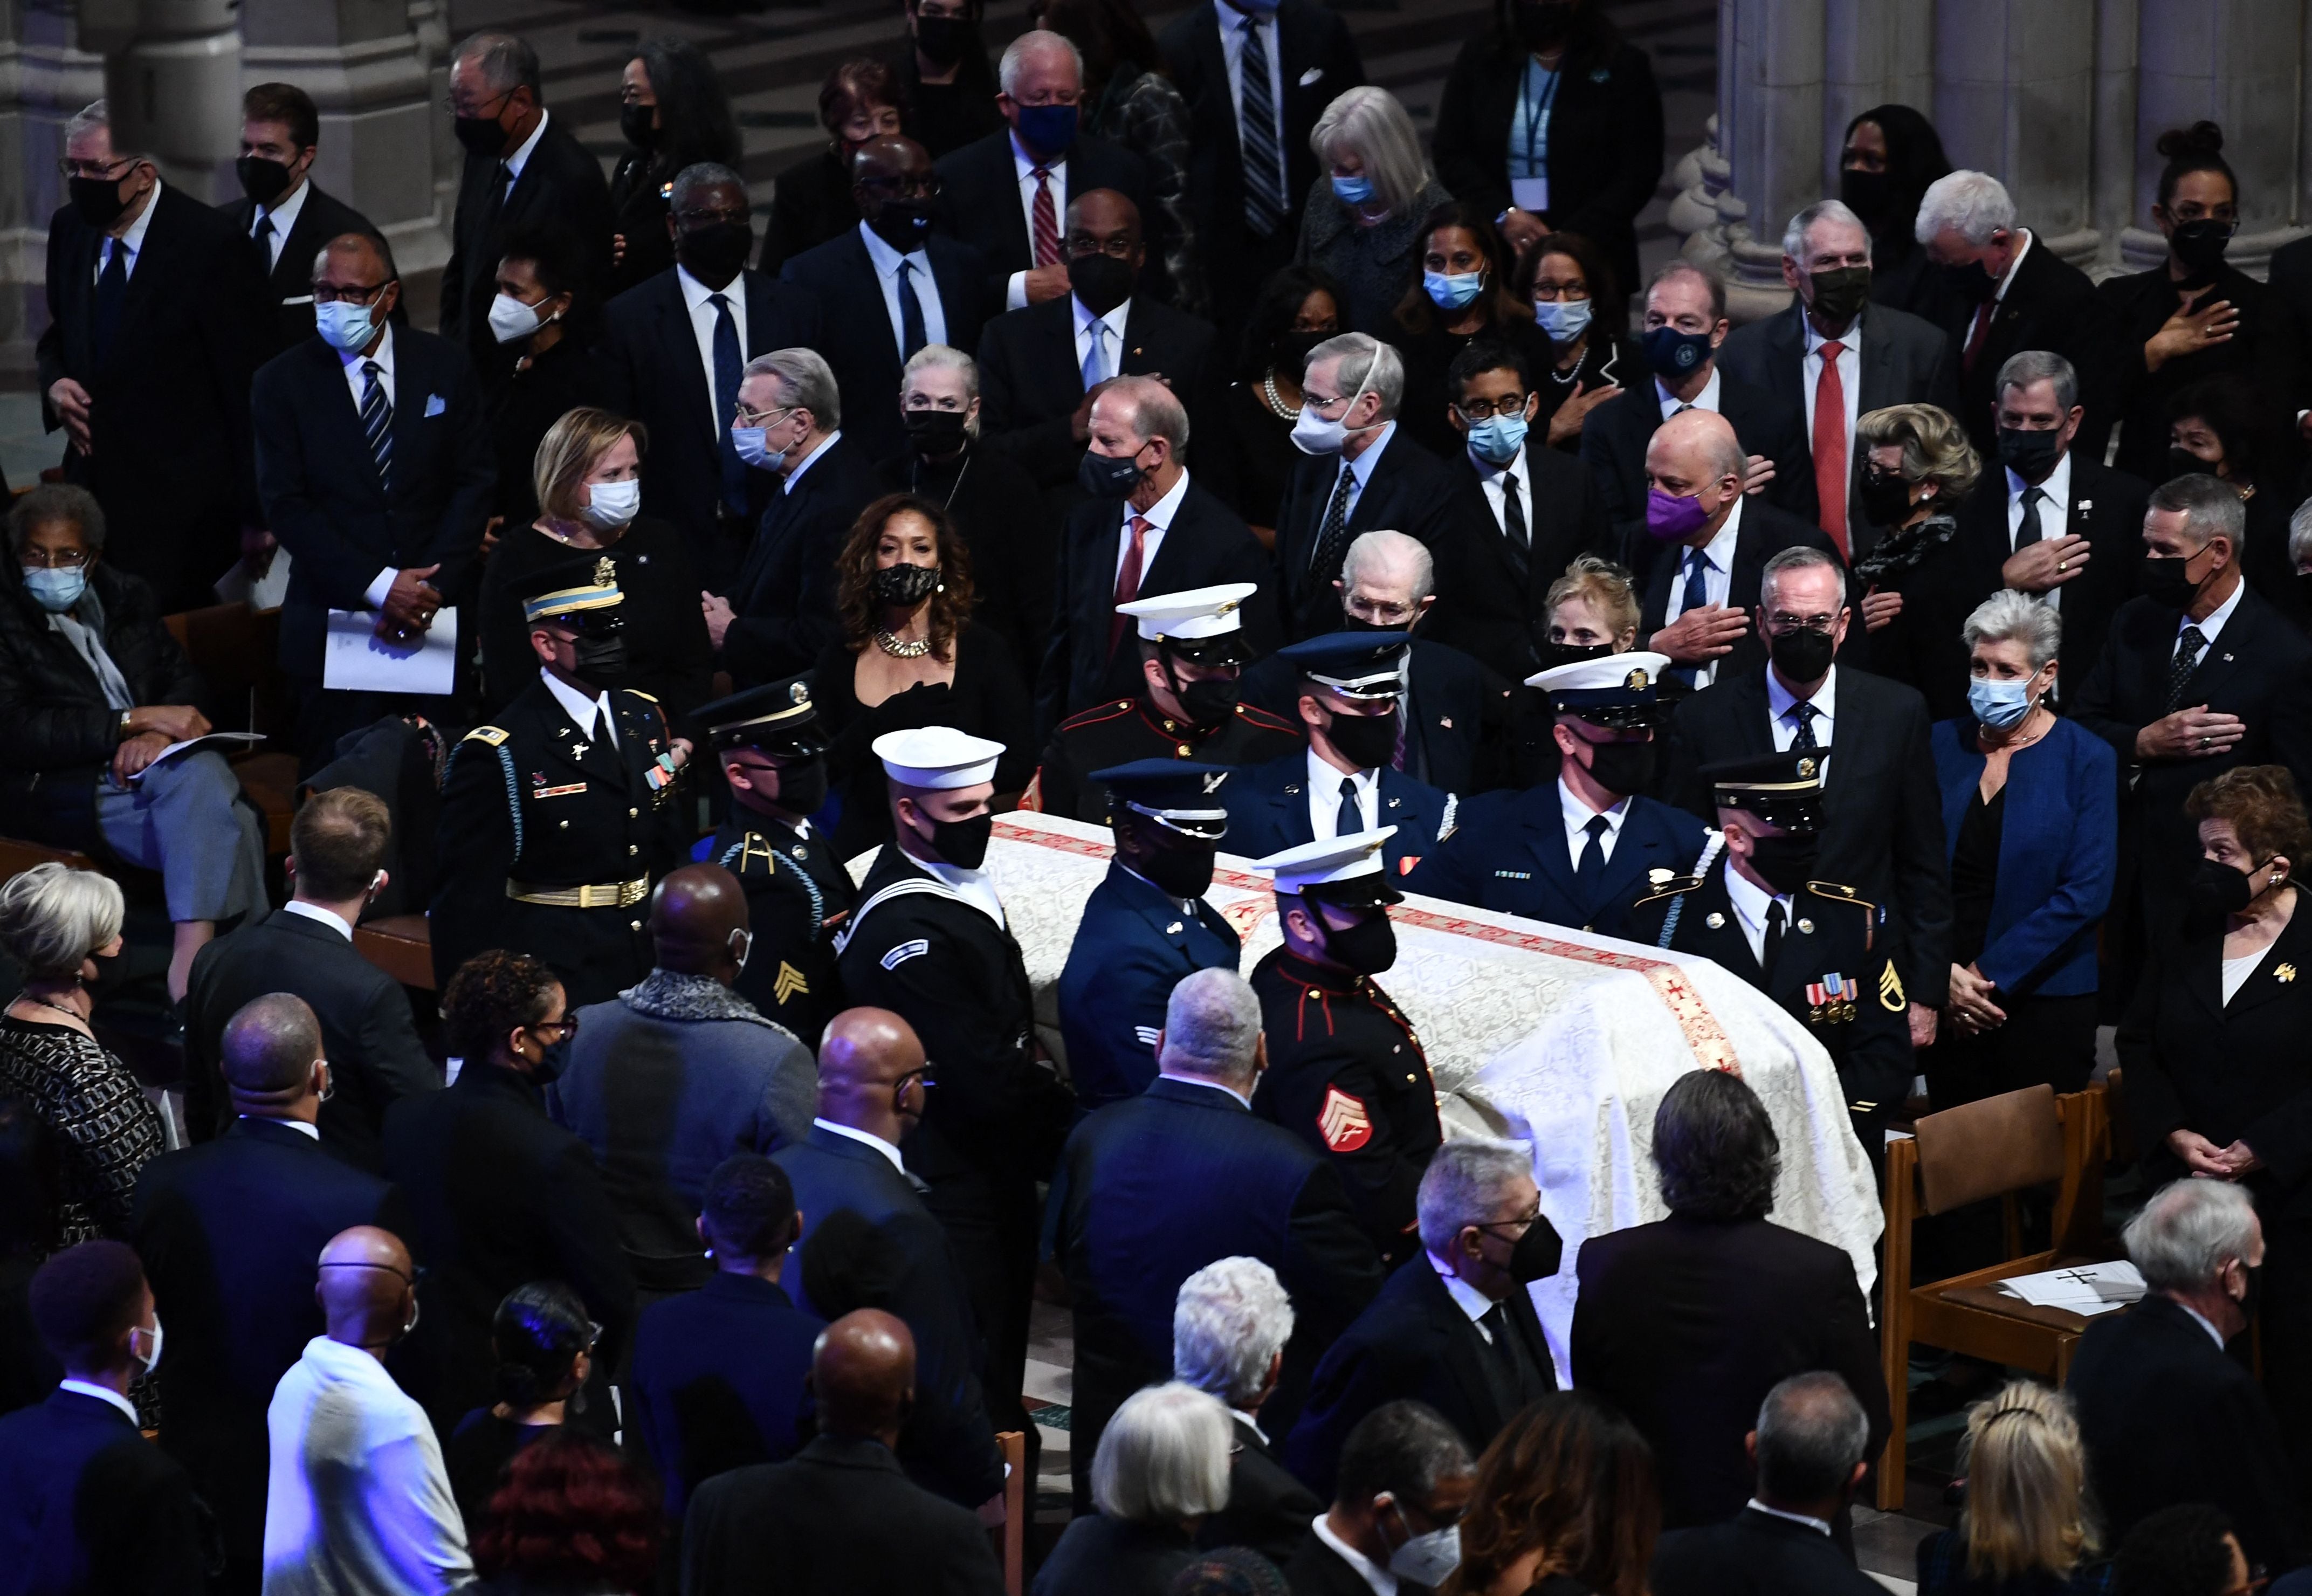 US officials attend a funeral for Colin Powell at the Washington National Cathedral on 5 November, 2021.